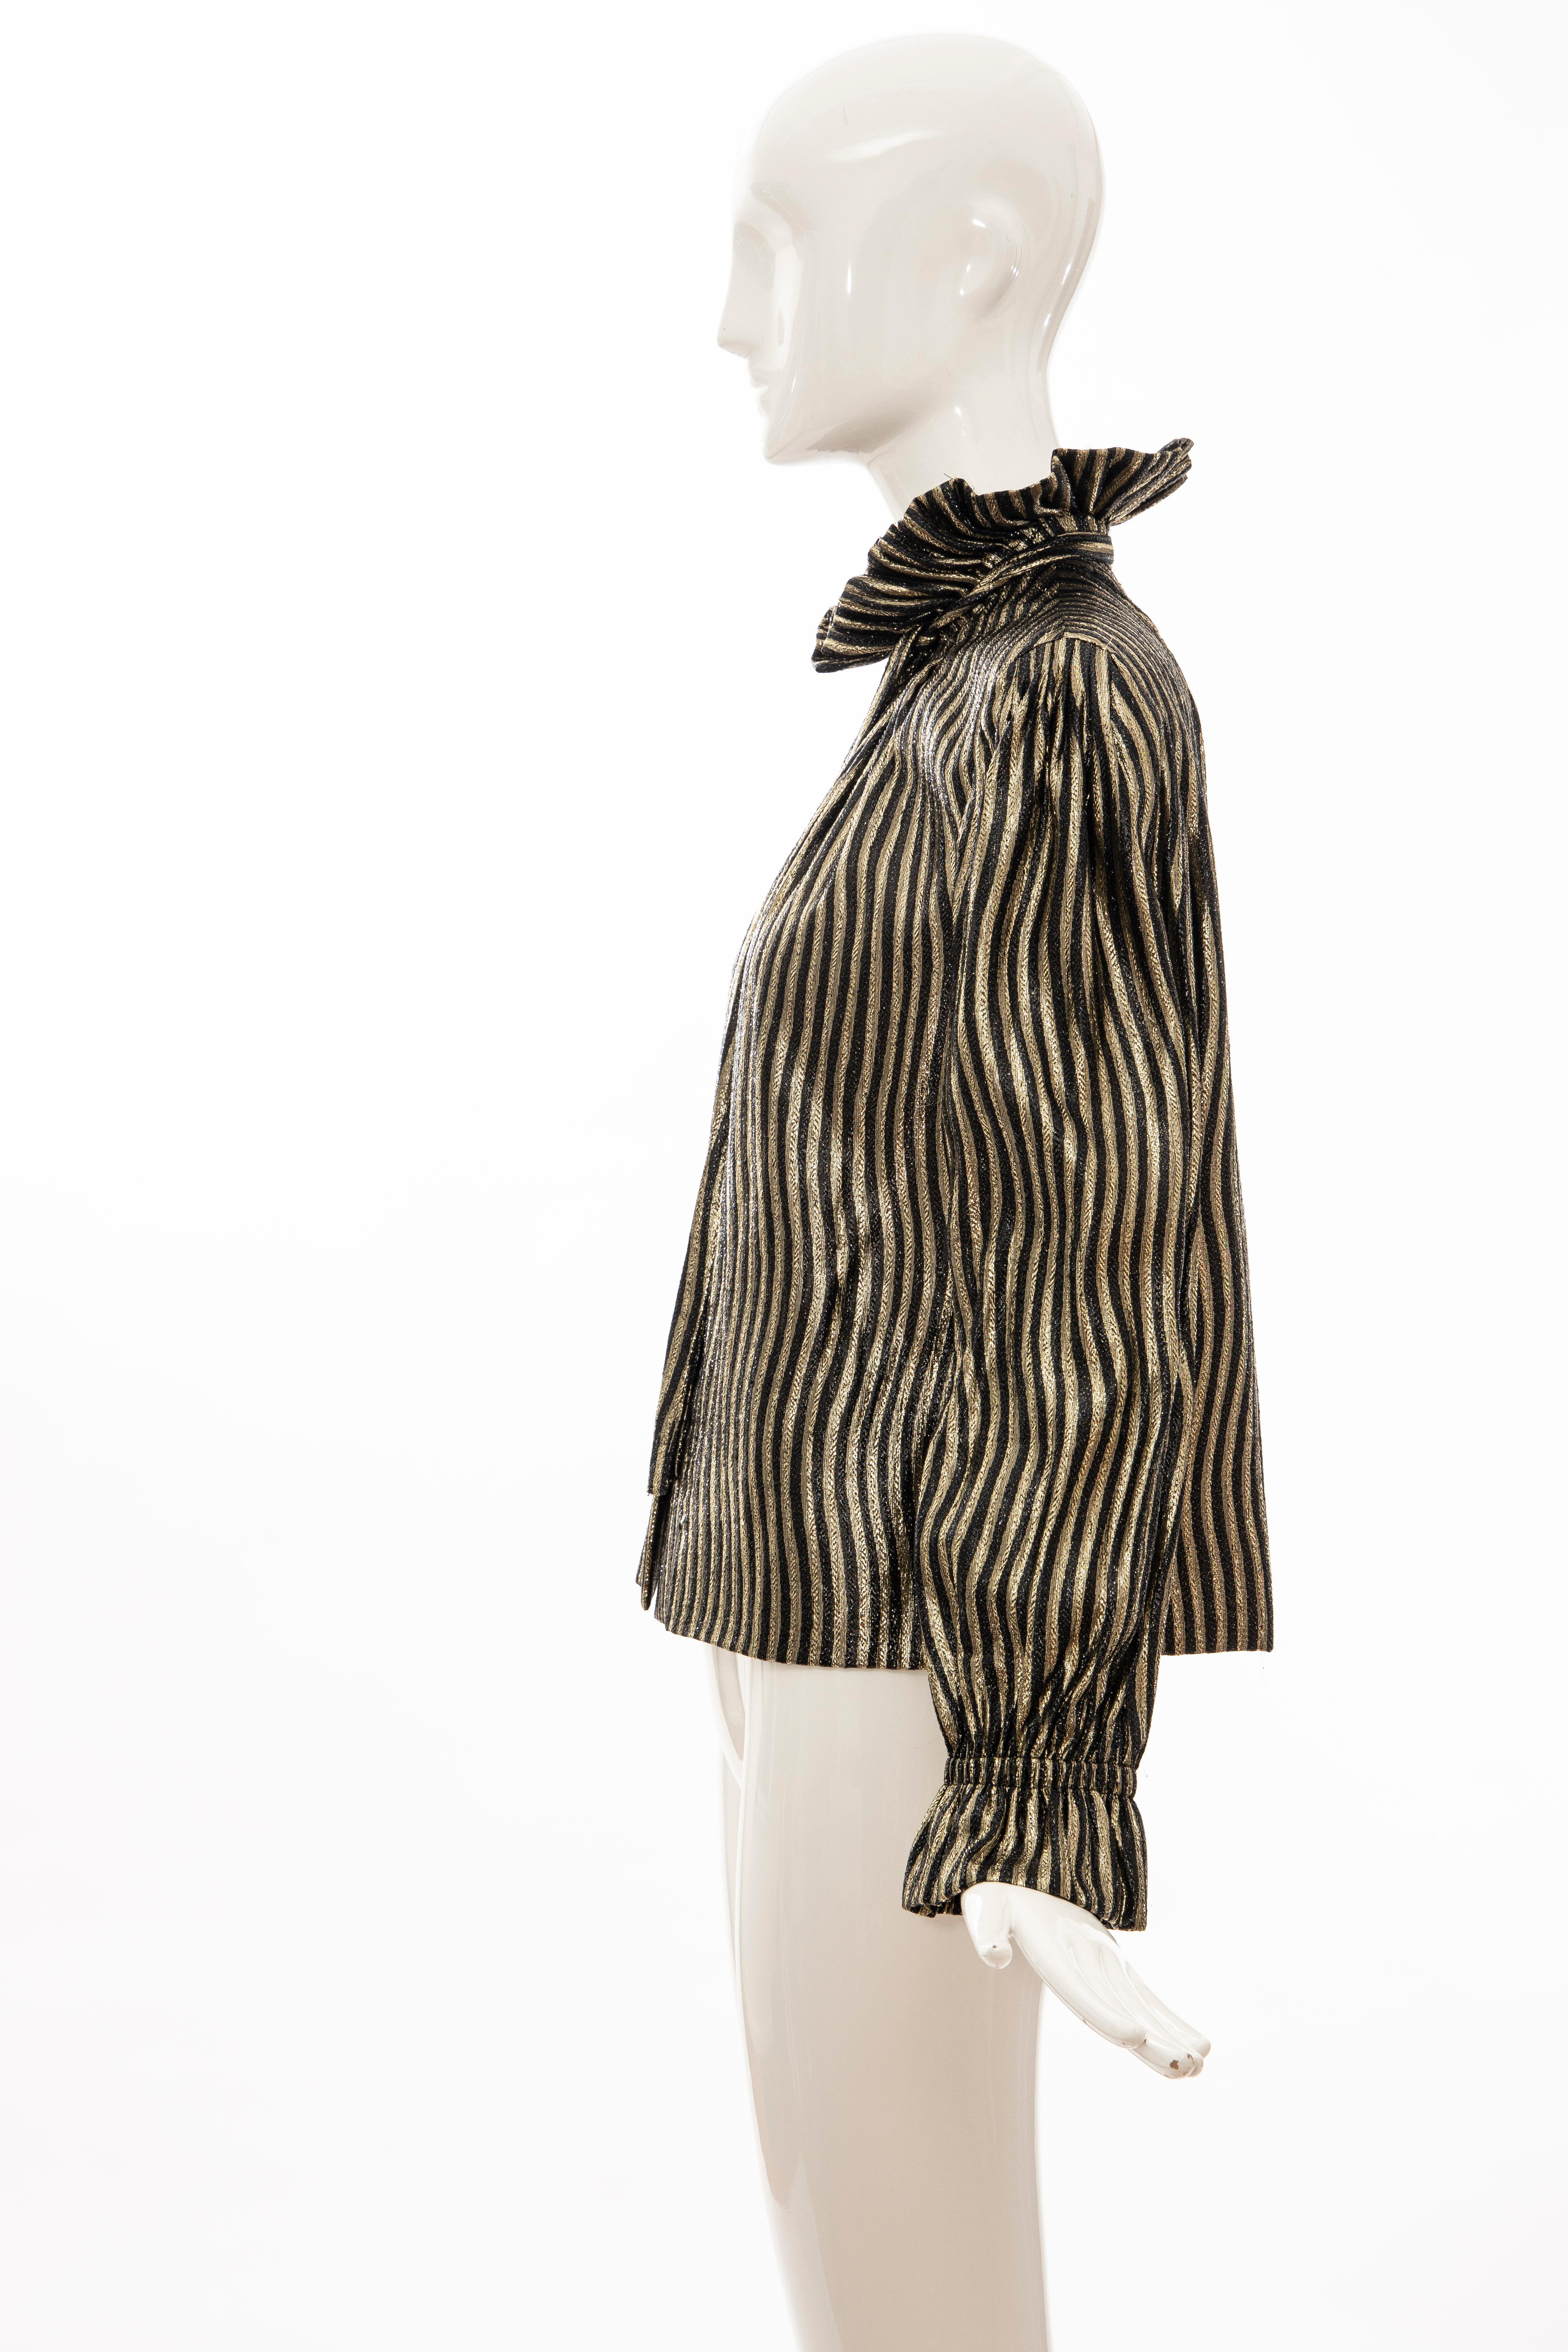 Pauline Trigere Black Gold Striped Metallic Snap Front Blouse, Circa: 1970's For Sale 7